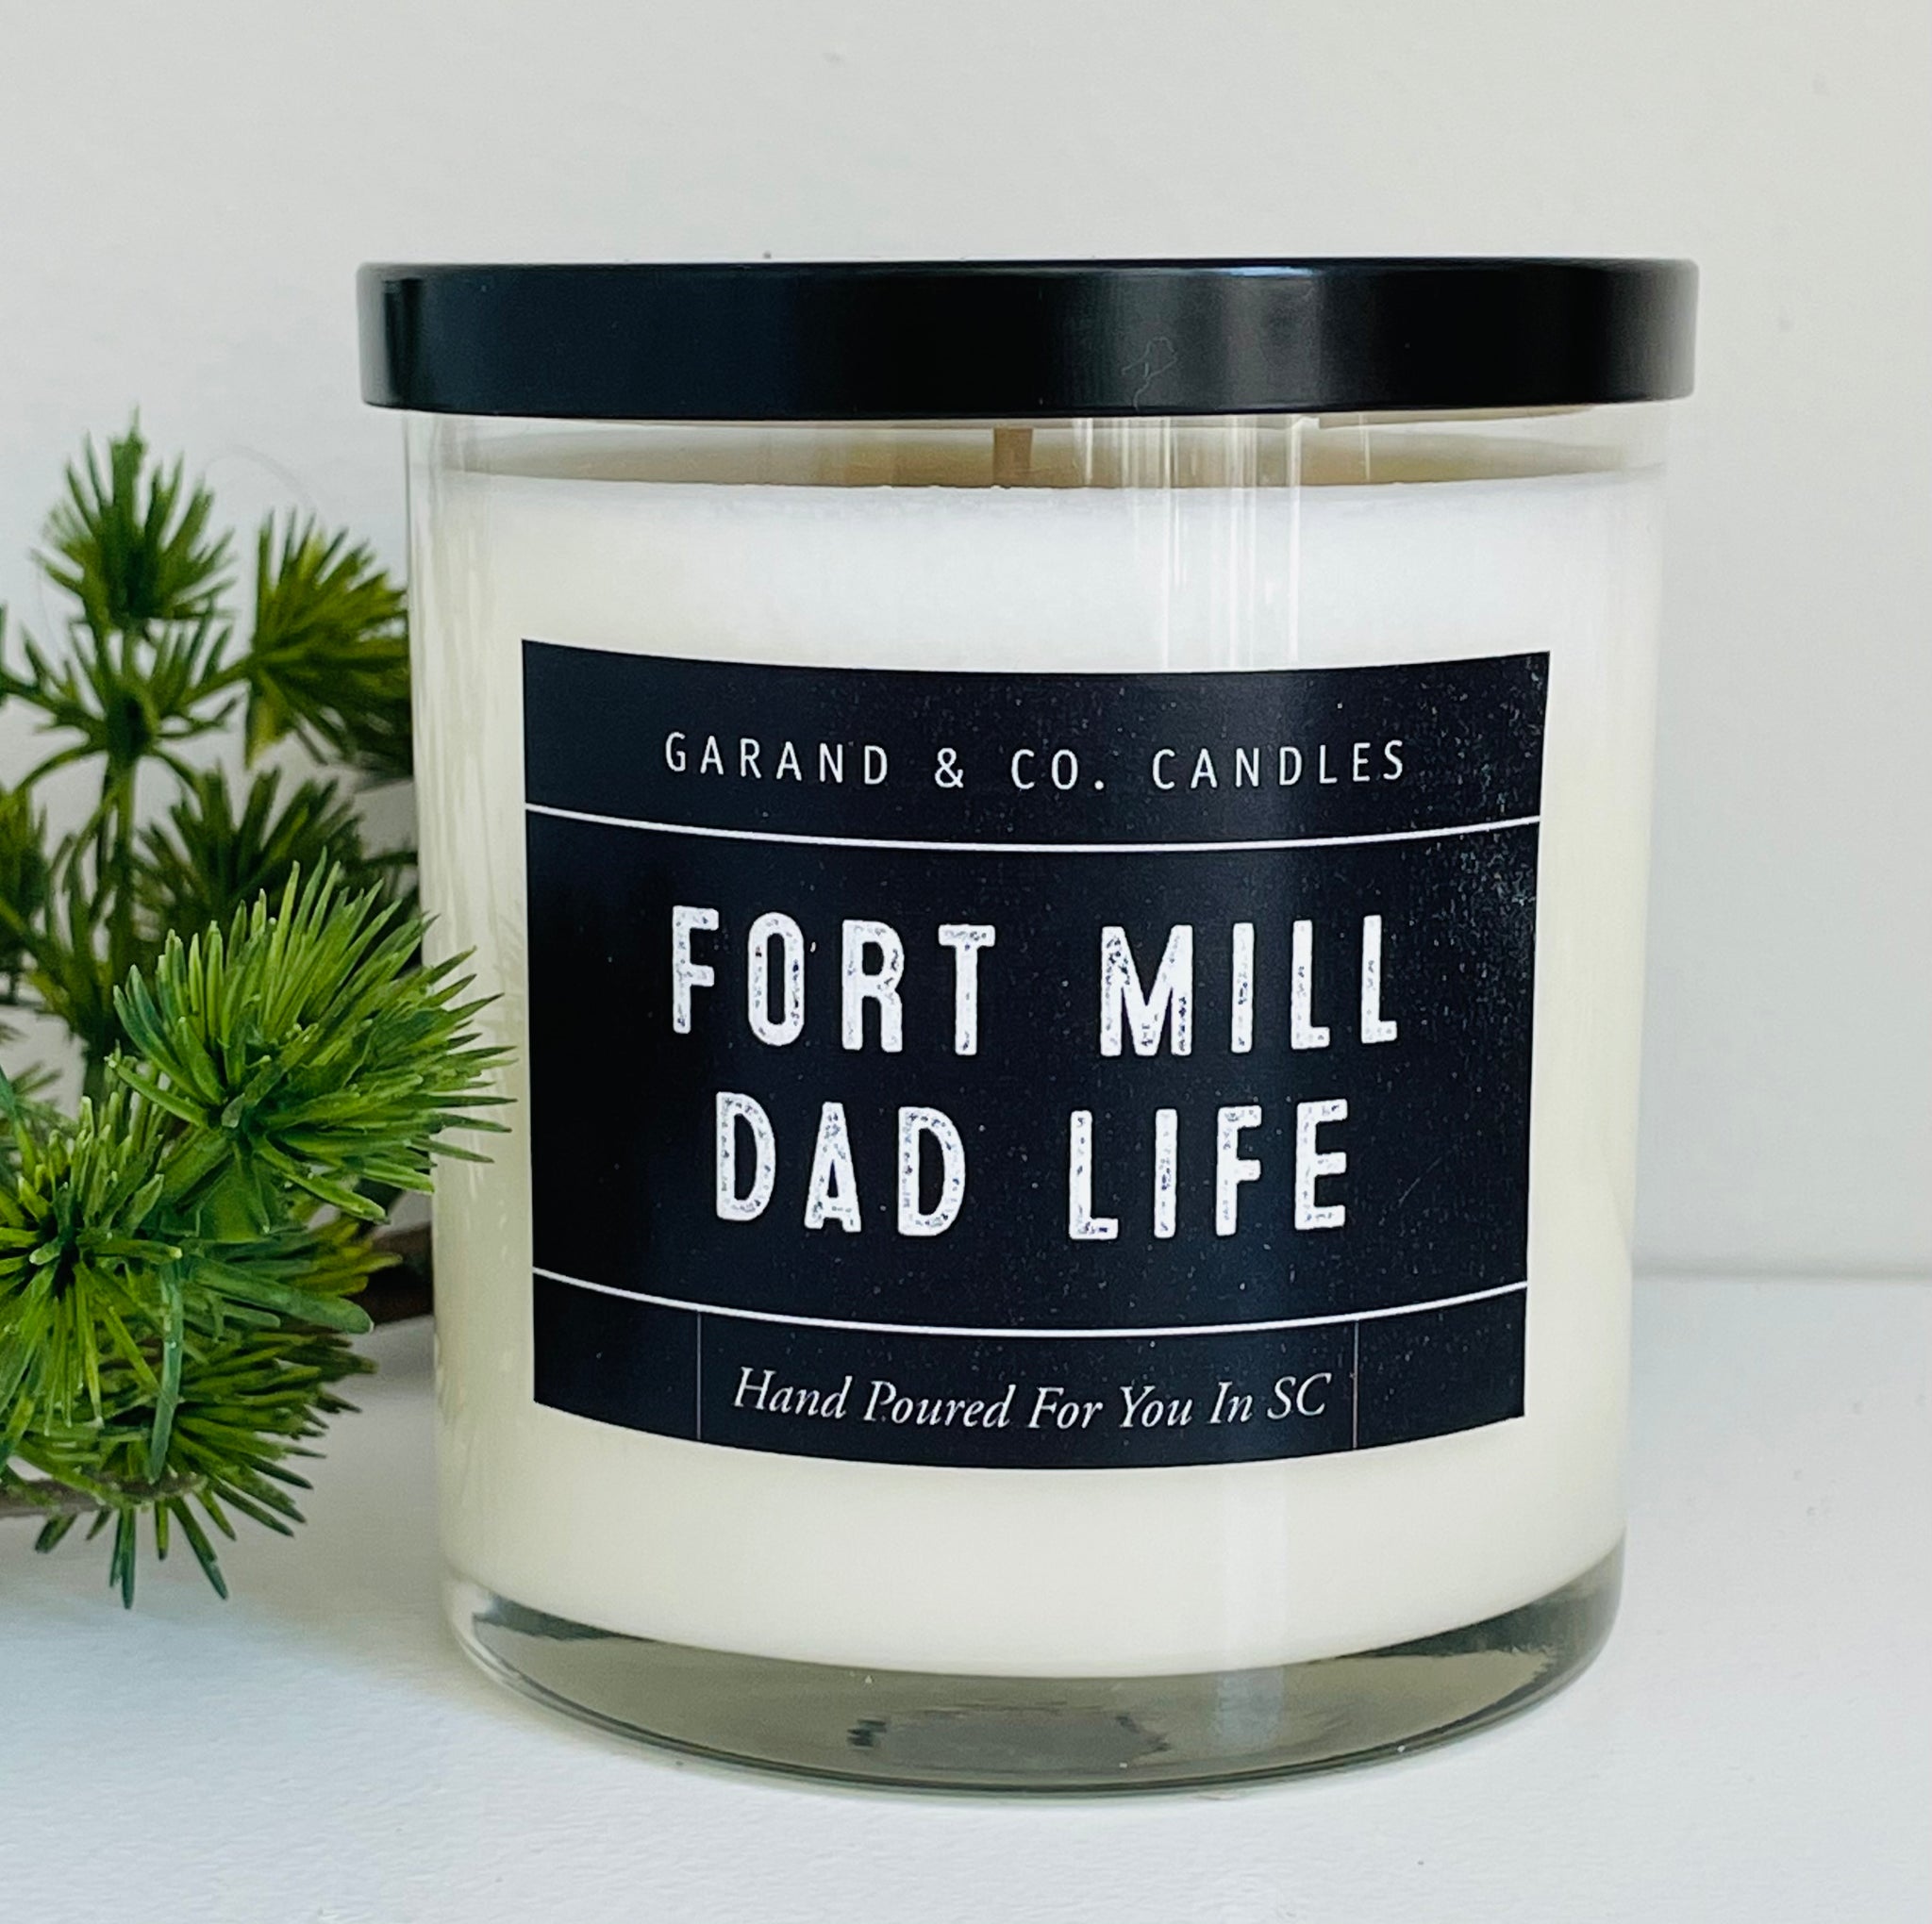 12 oz Clear Glass Jar Candle - Fort Mill Dad Life